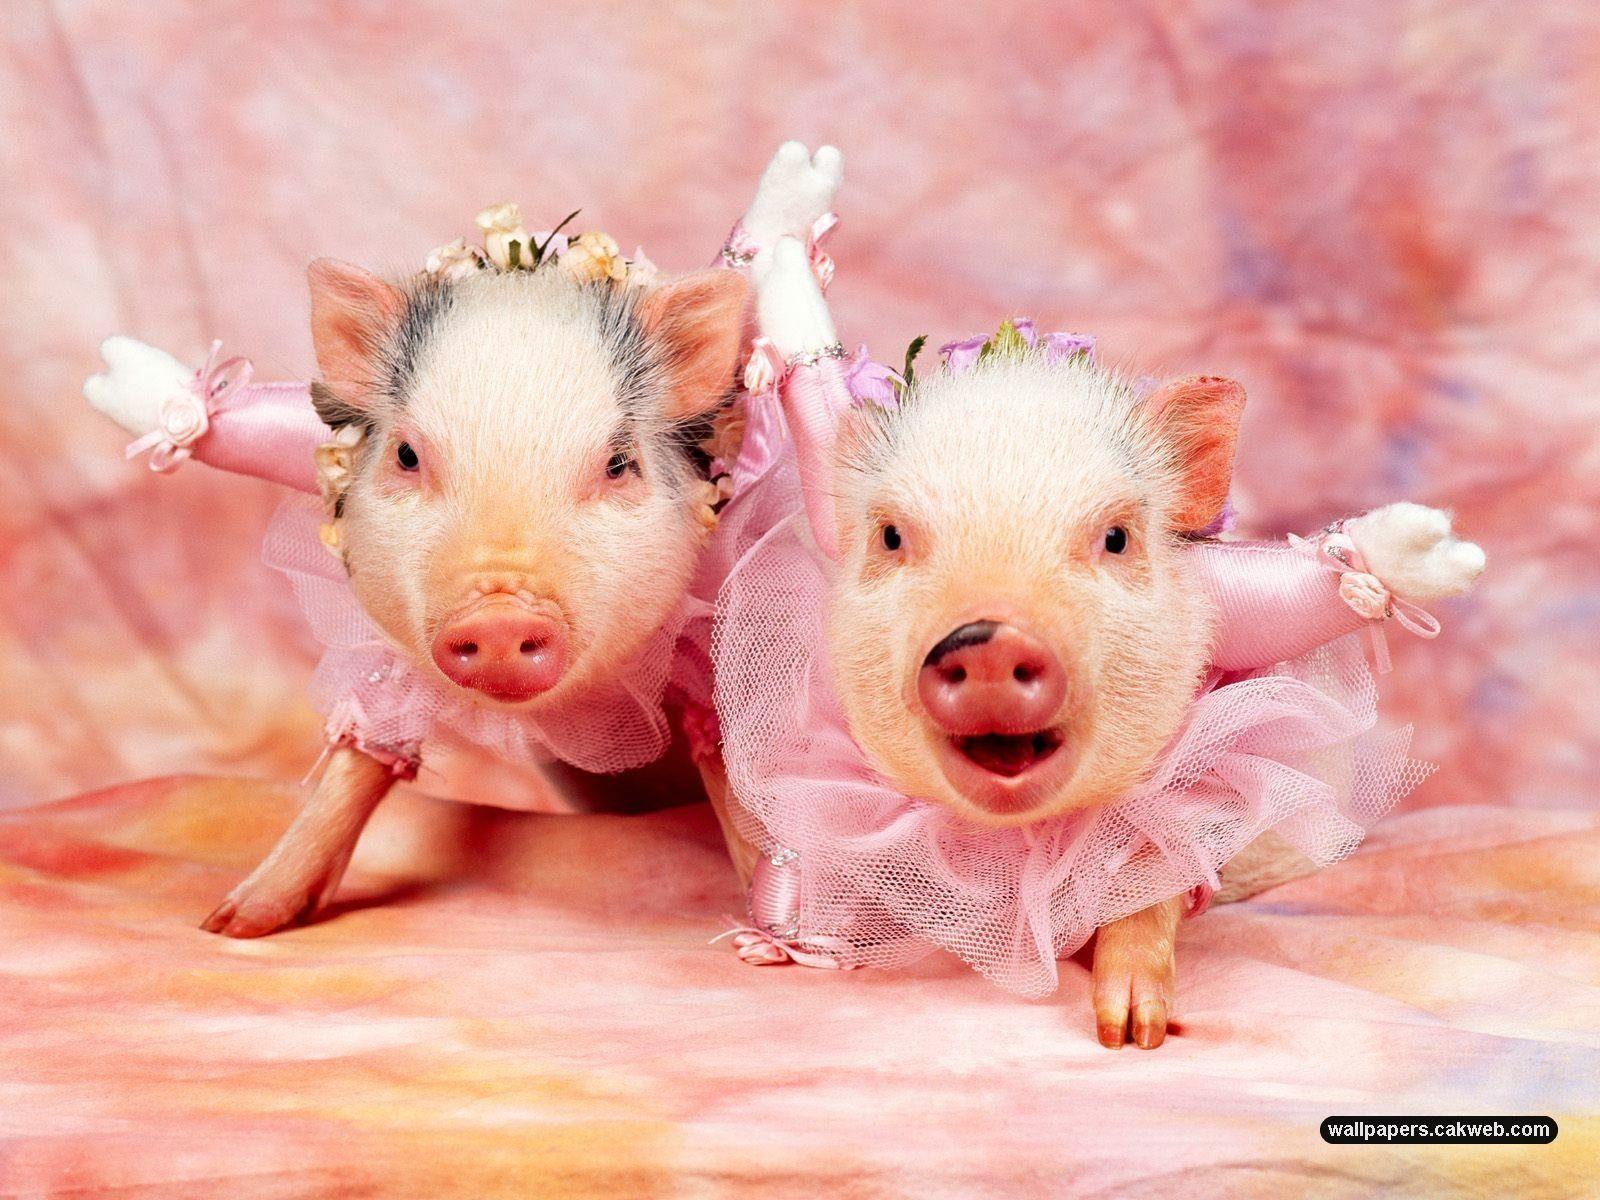 Pigs dressed up. Baby animals :). Cute animals, Cute pigs, Animals